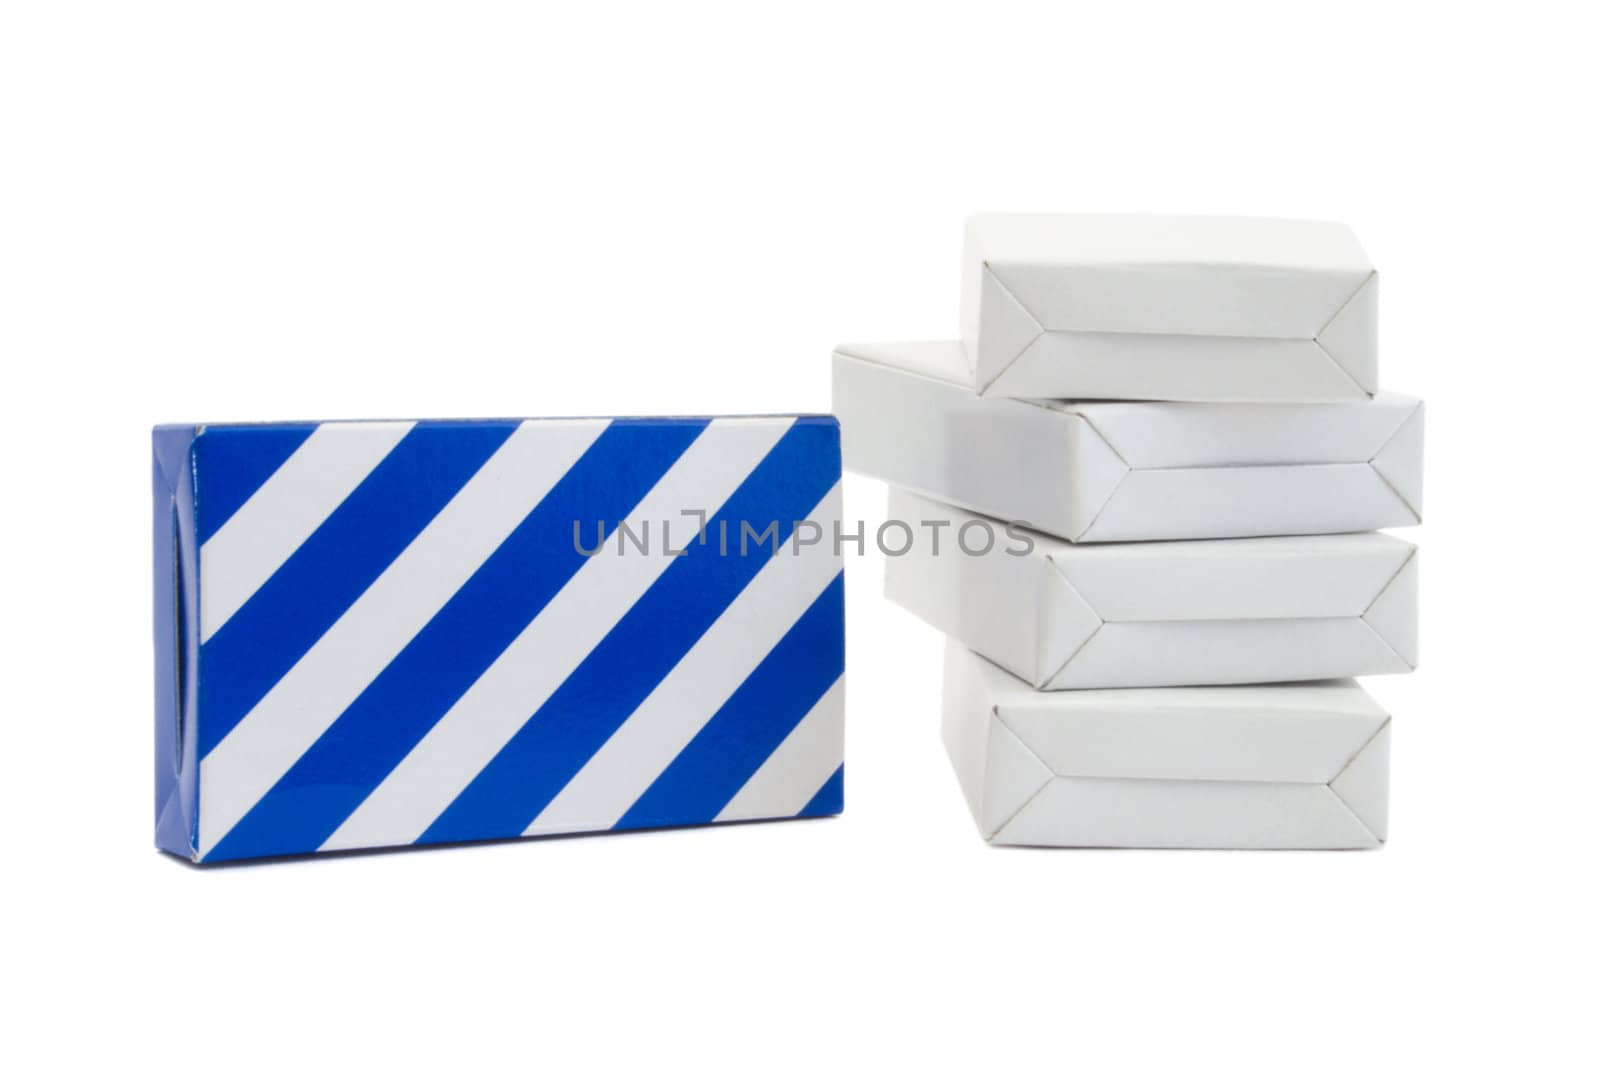 Blue striped and white carton boxes isolated on white background